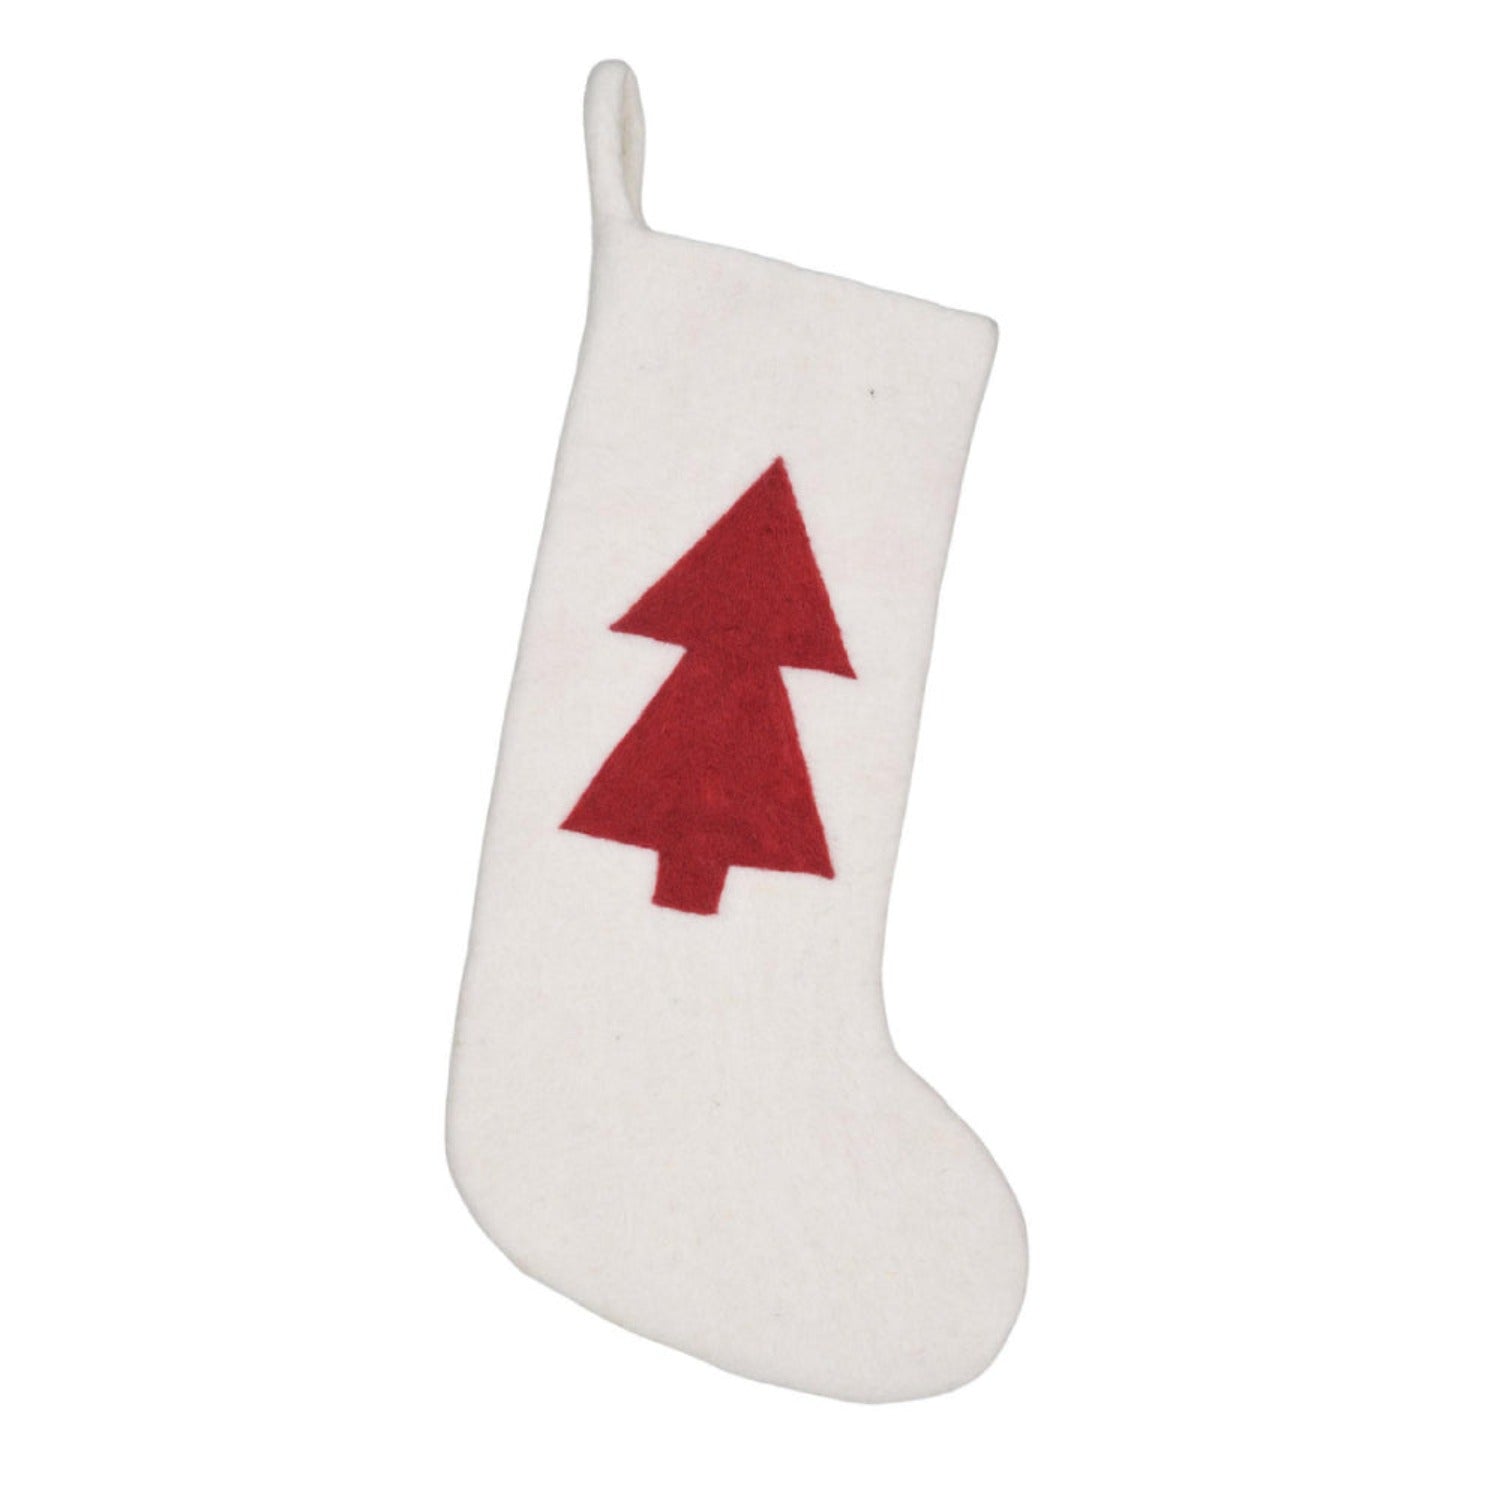 Southwold Warm White and Brick Red Stocking